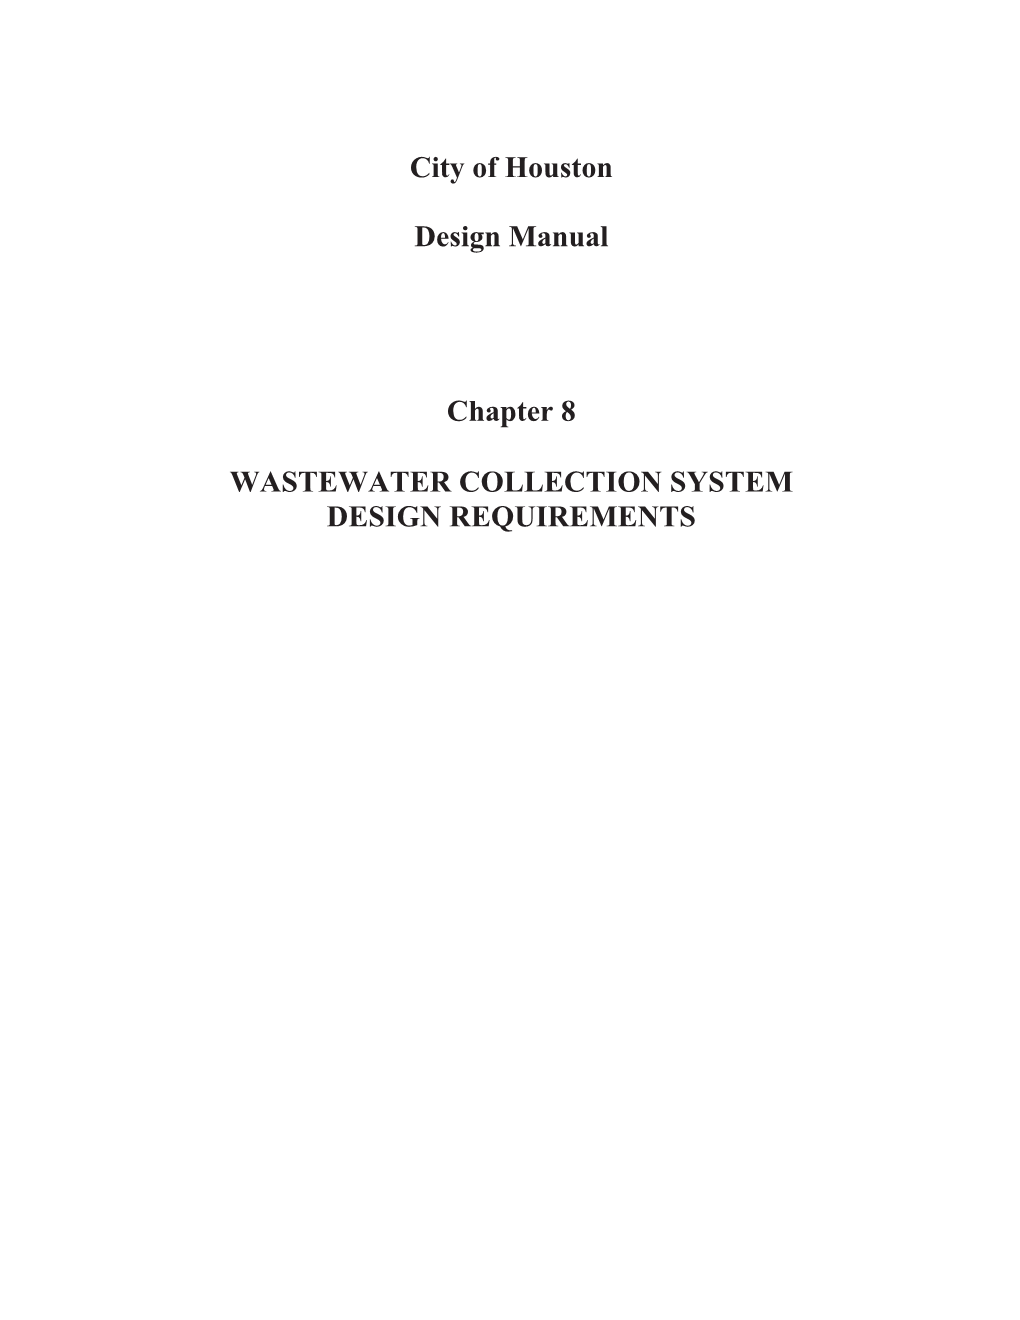 City of Houston Design Manual Chapter 8 WASTEWATER